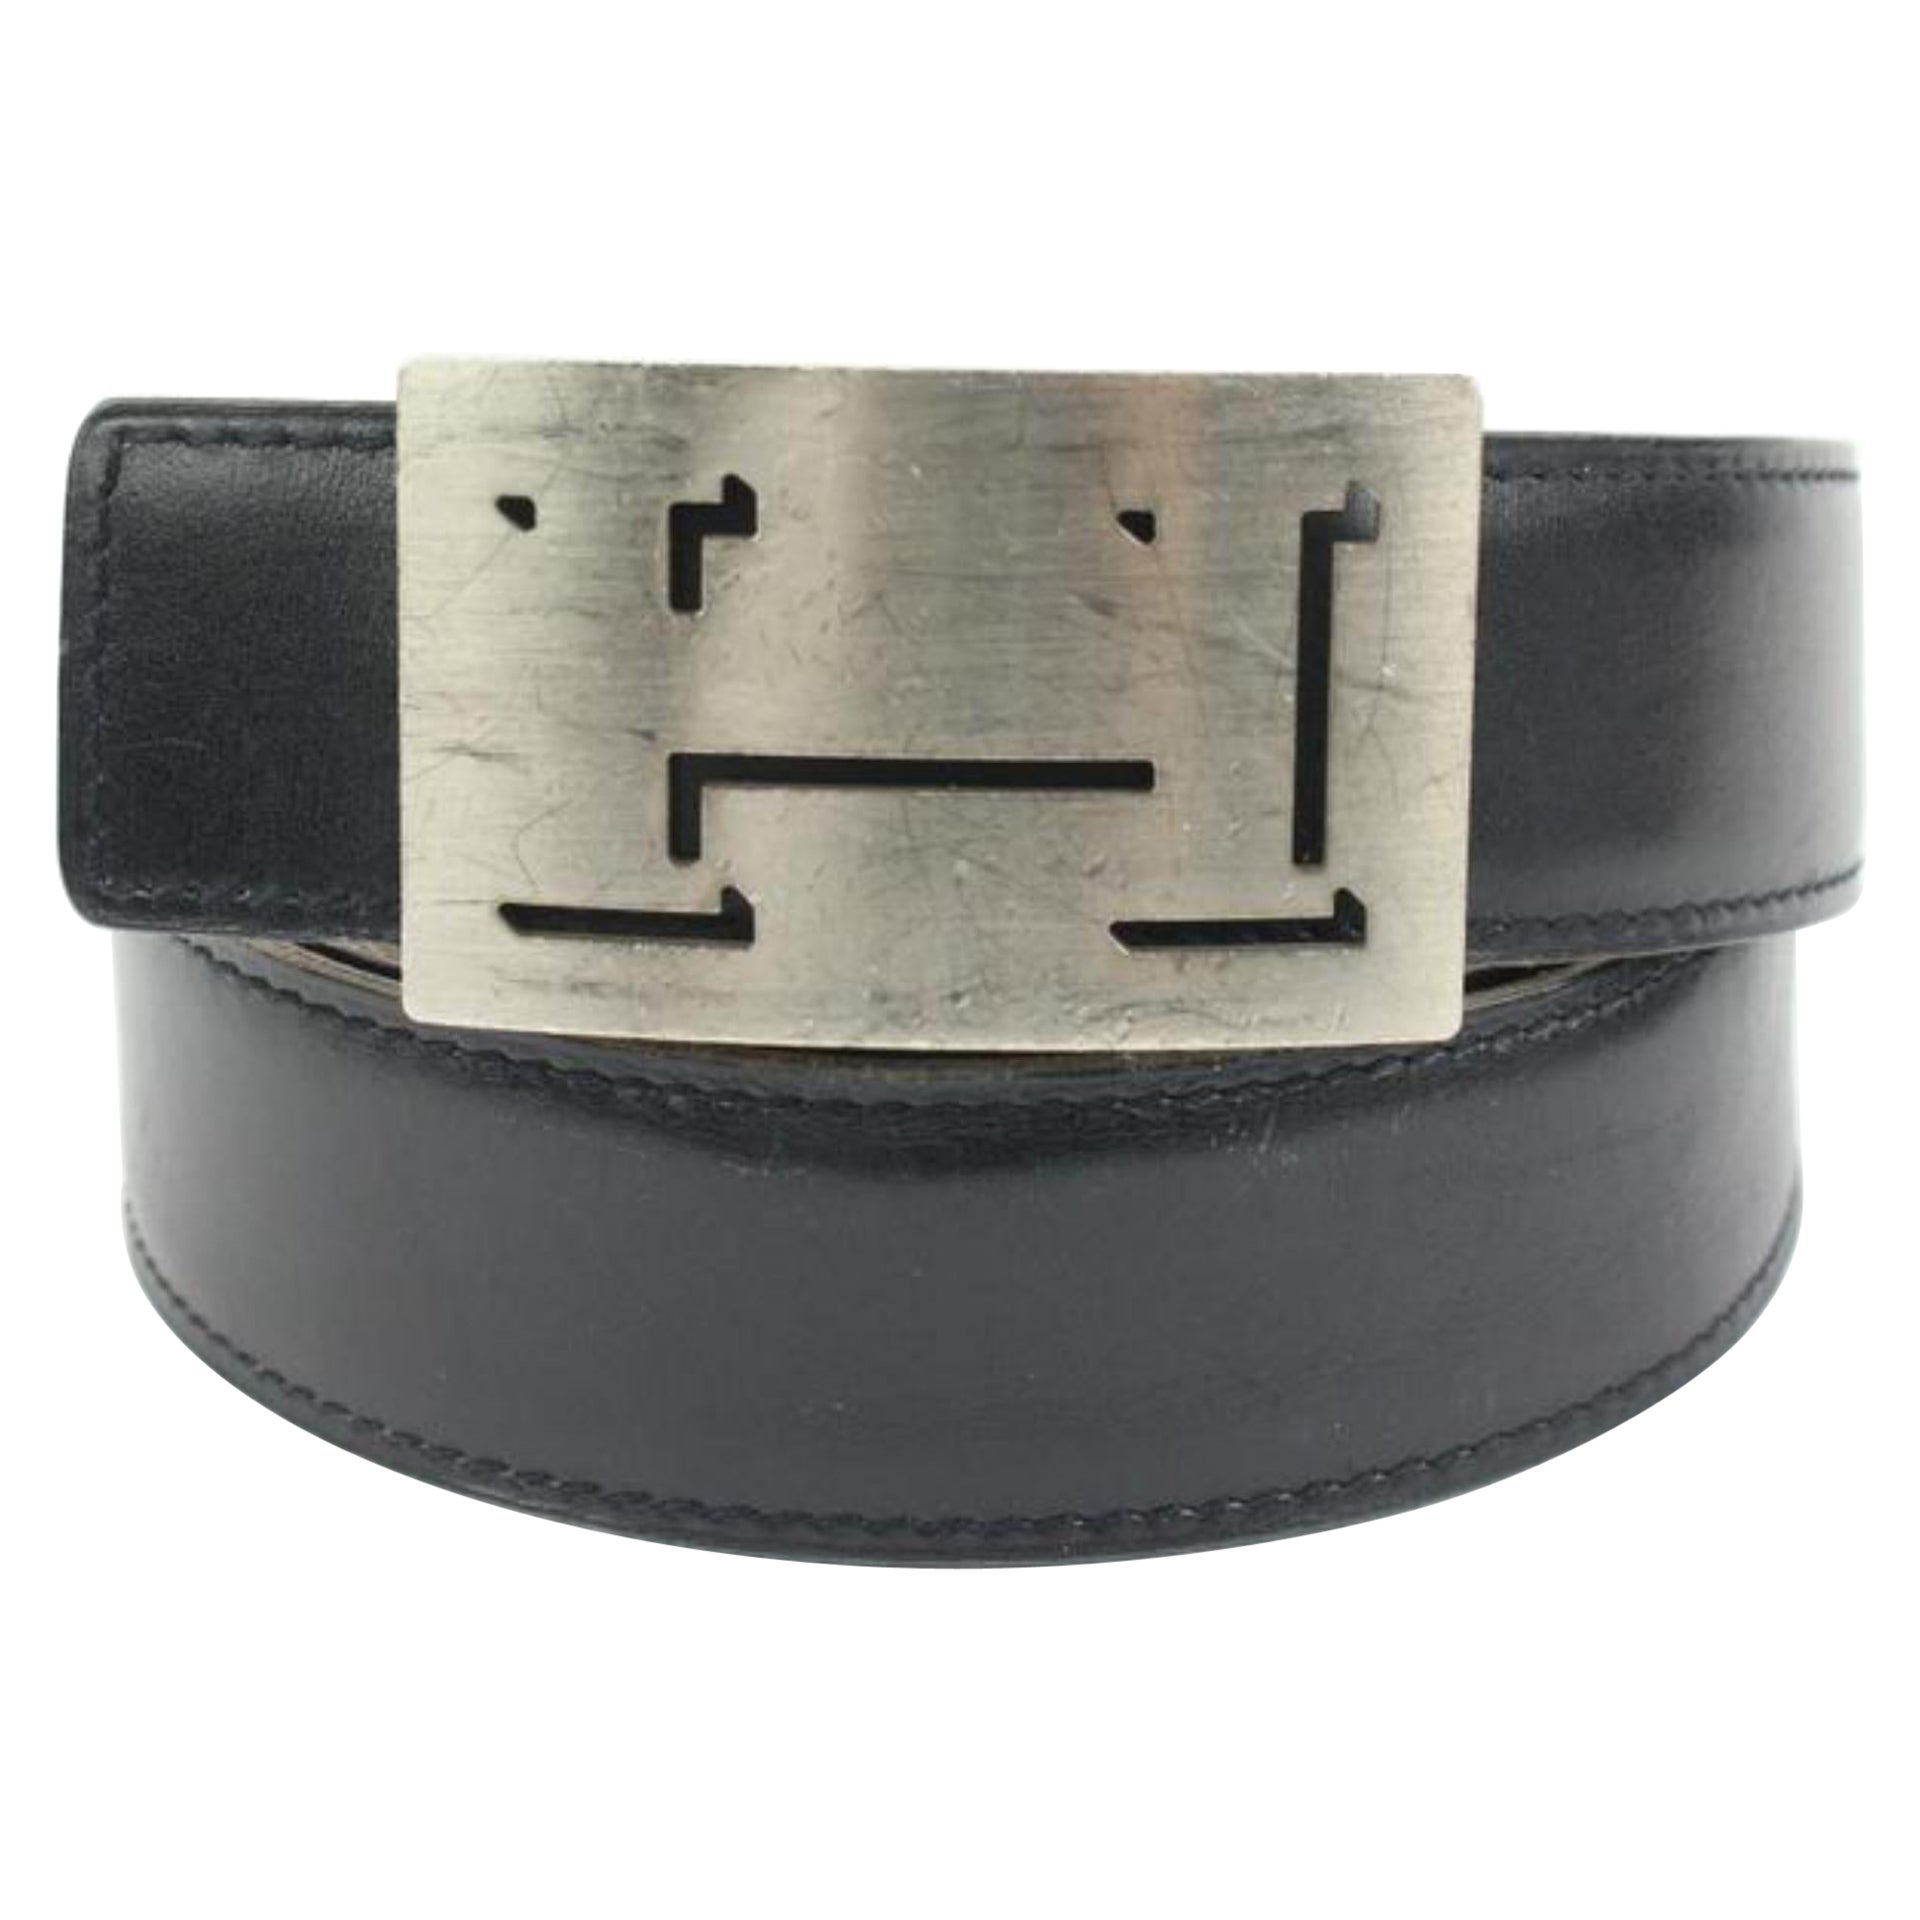 Hermes Men's 42mm H belt is Worth It! Review and Comparison 